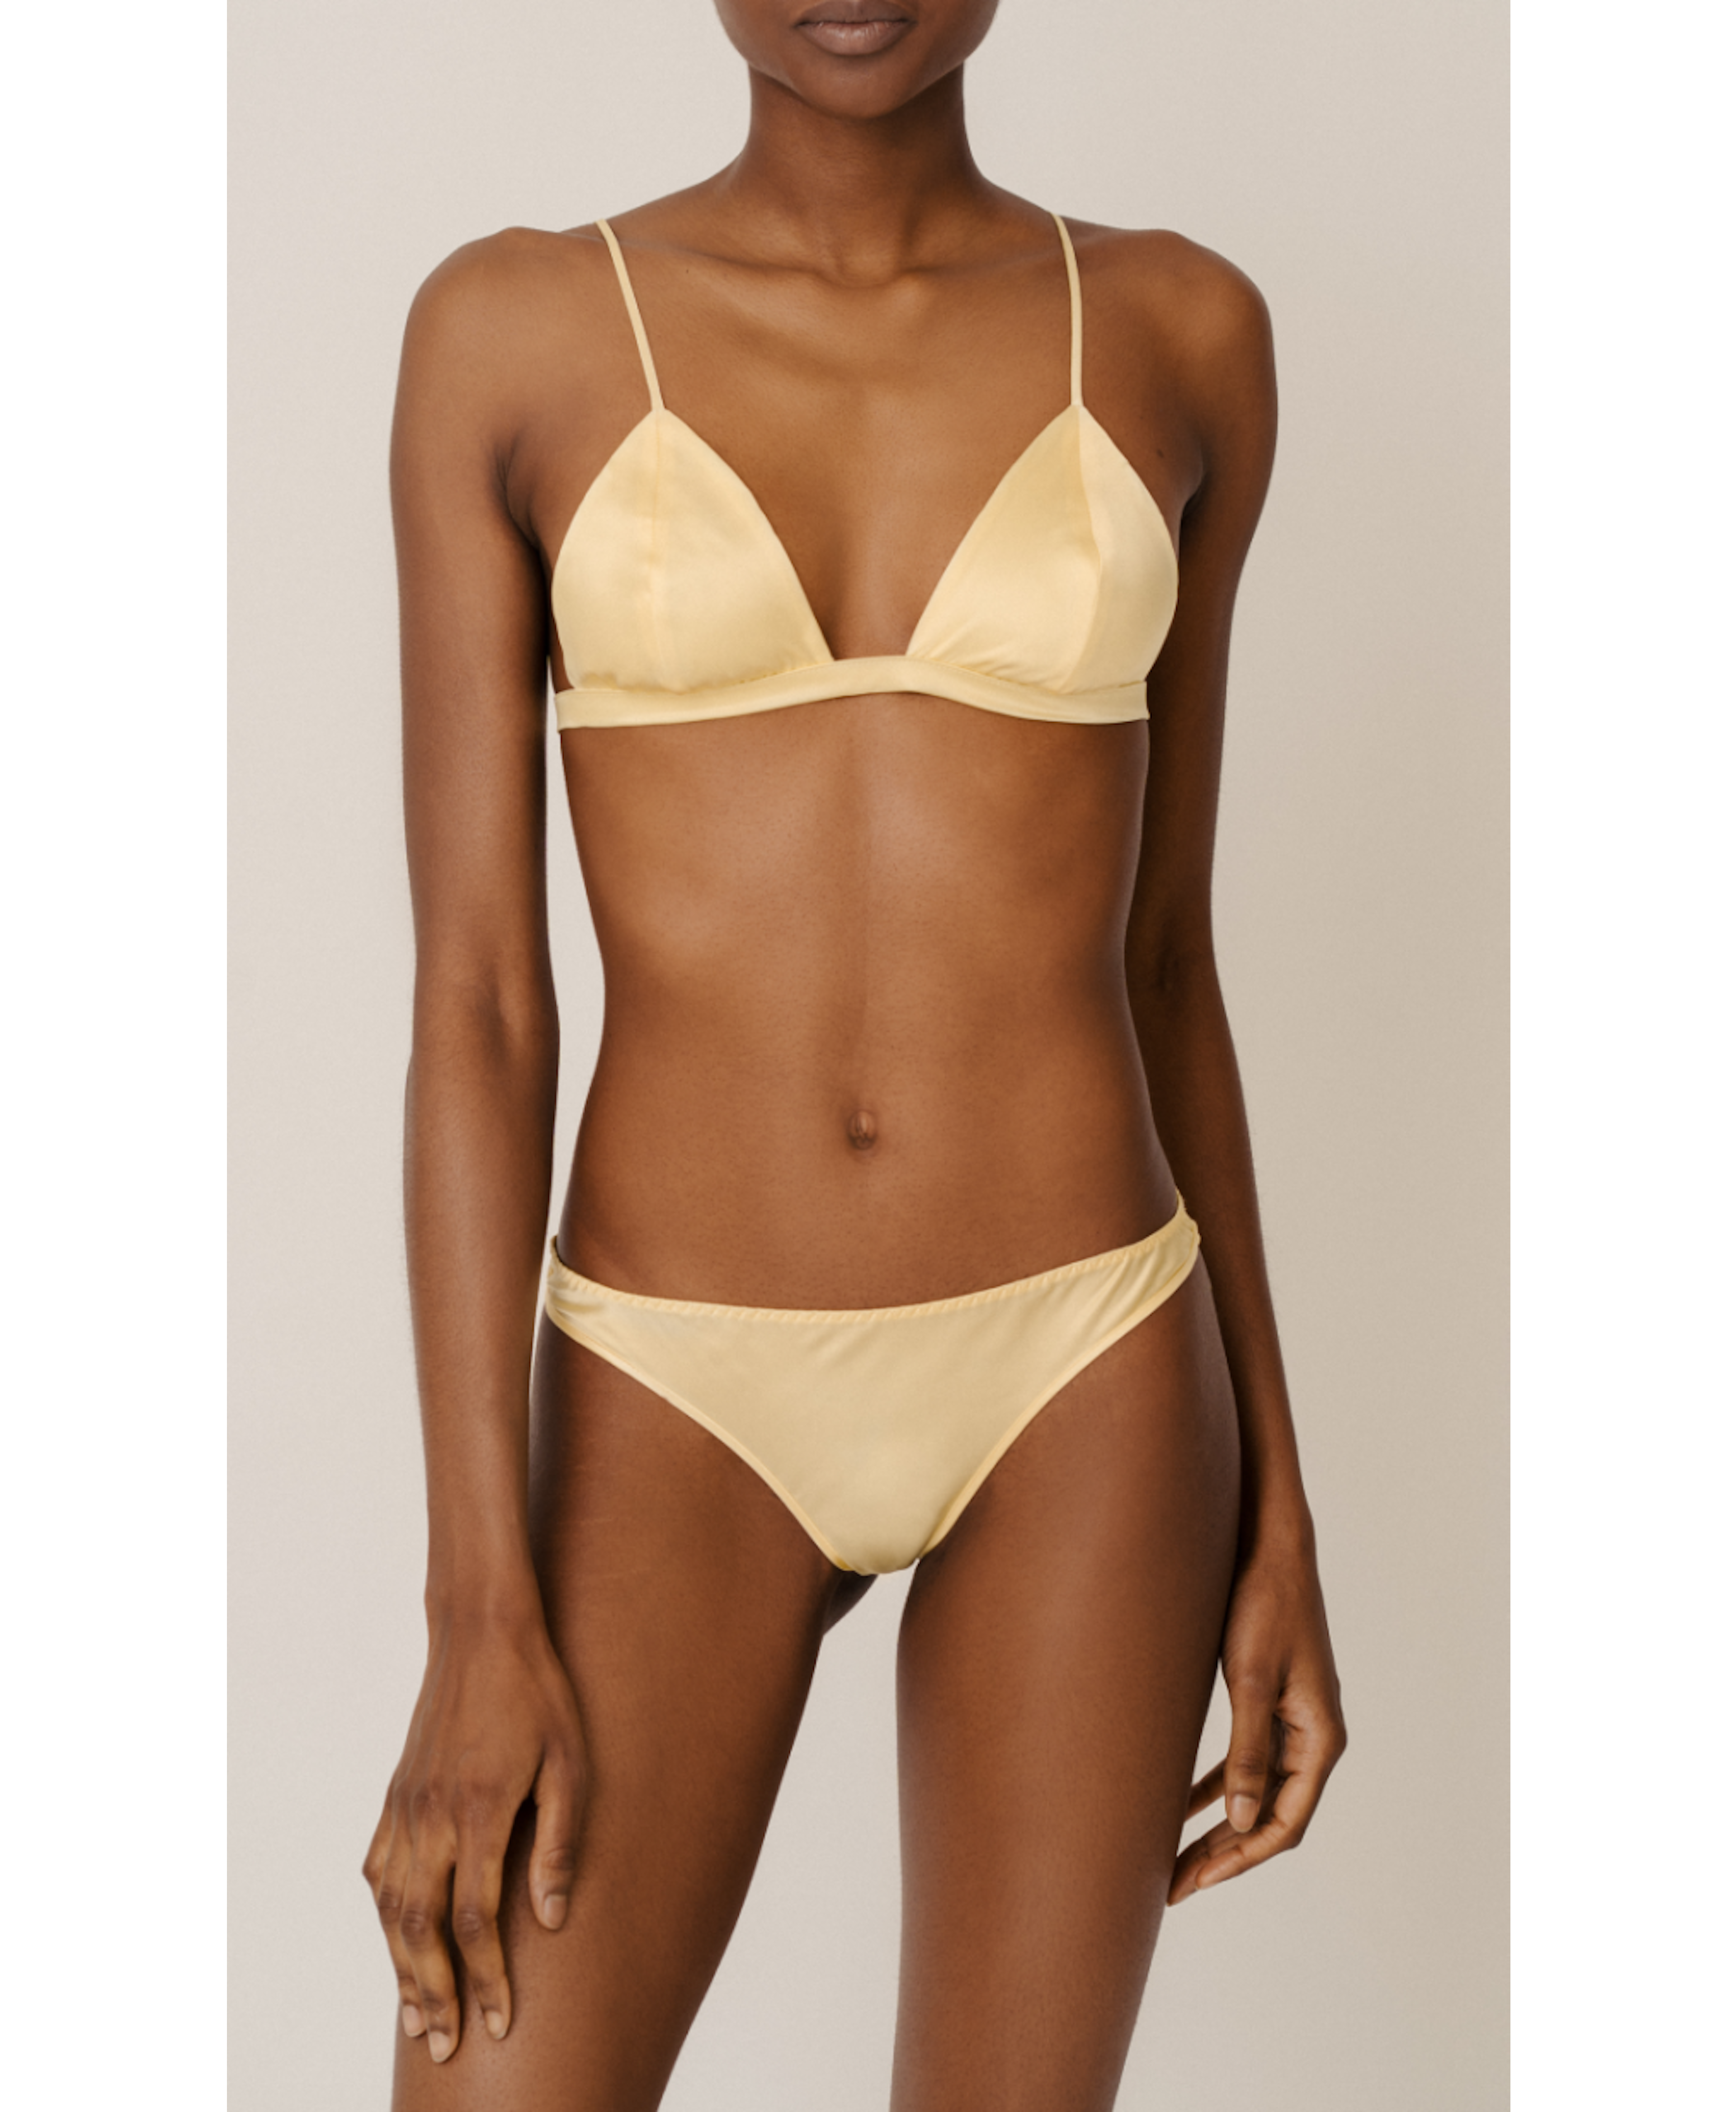 Shop BUTTER COLOR SILK BRA TOP: IVY from HERTH at Seezona